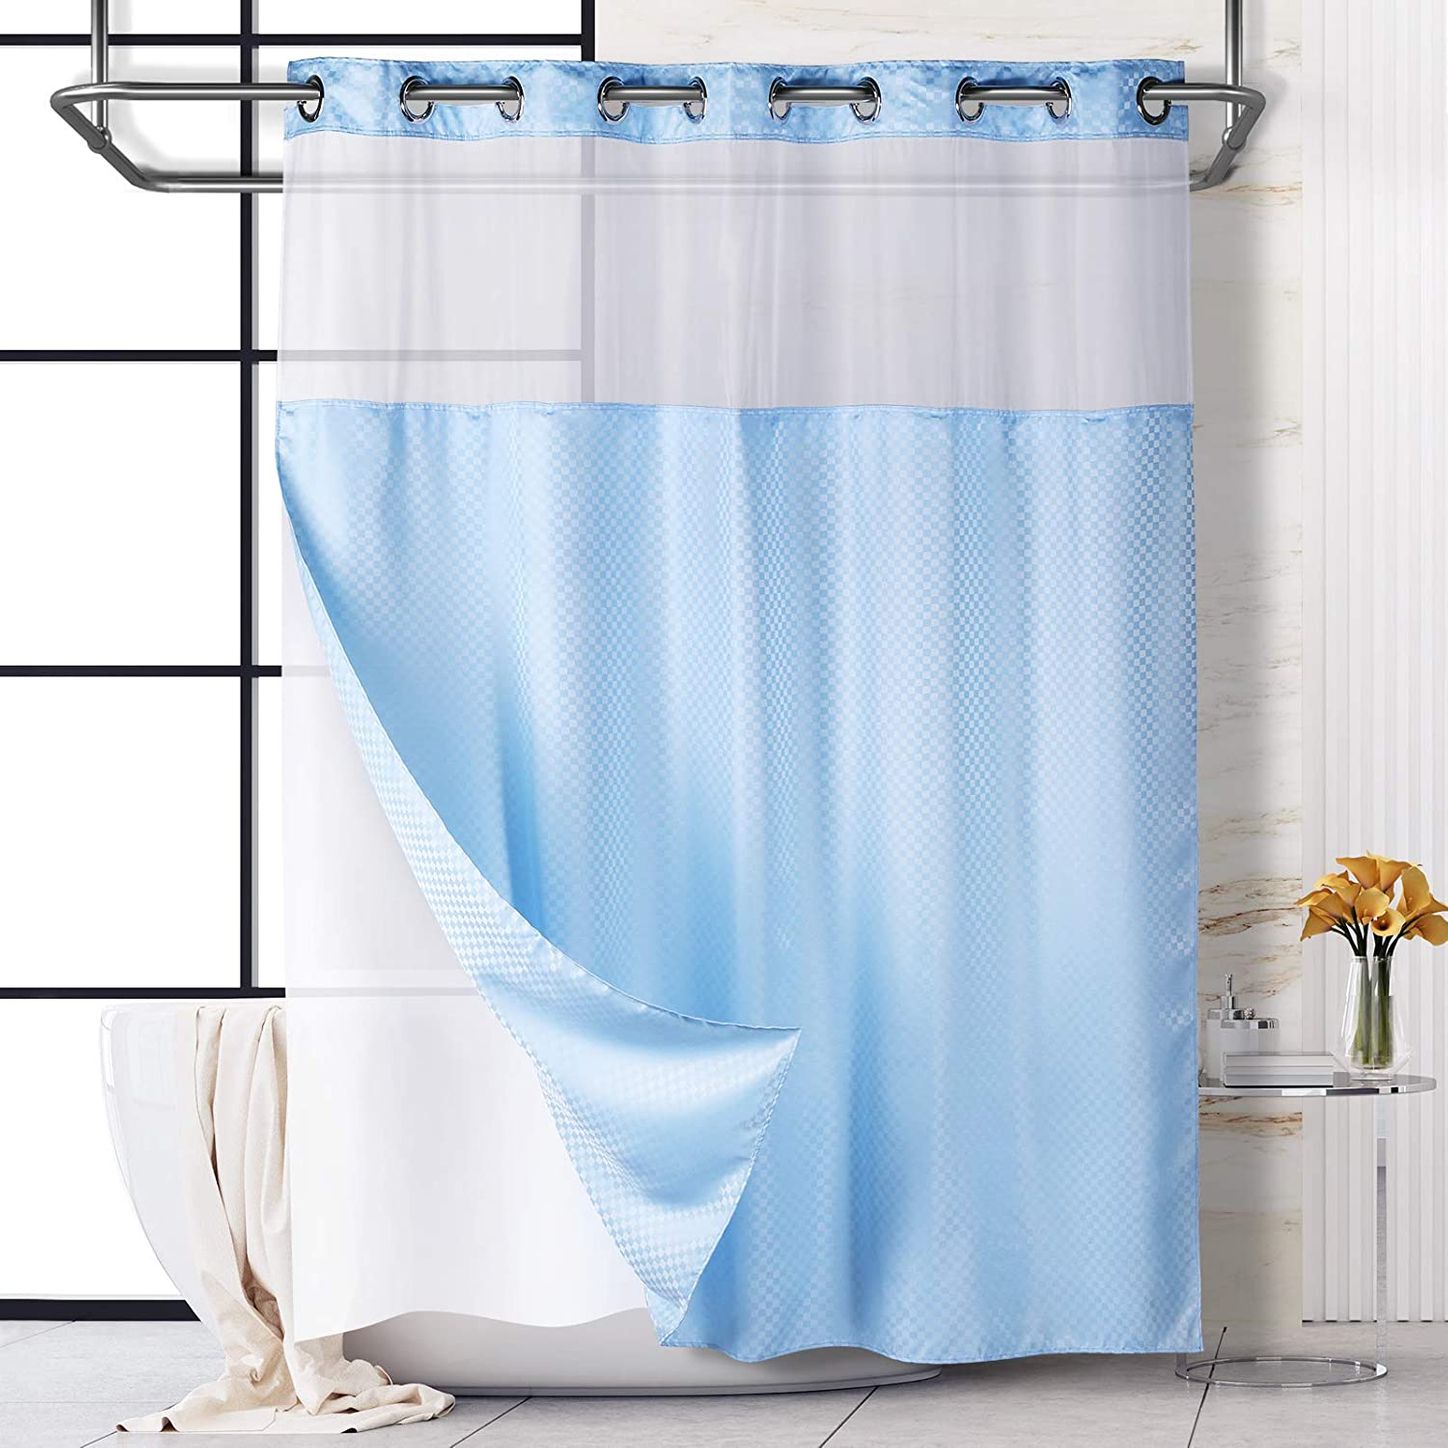 19 Best Shower Curtains 2021 The, Plastic Bathroom Curtains For Windows